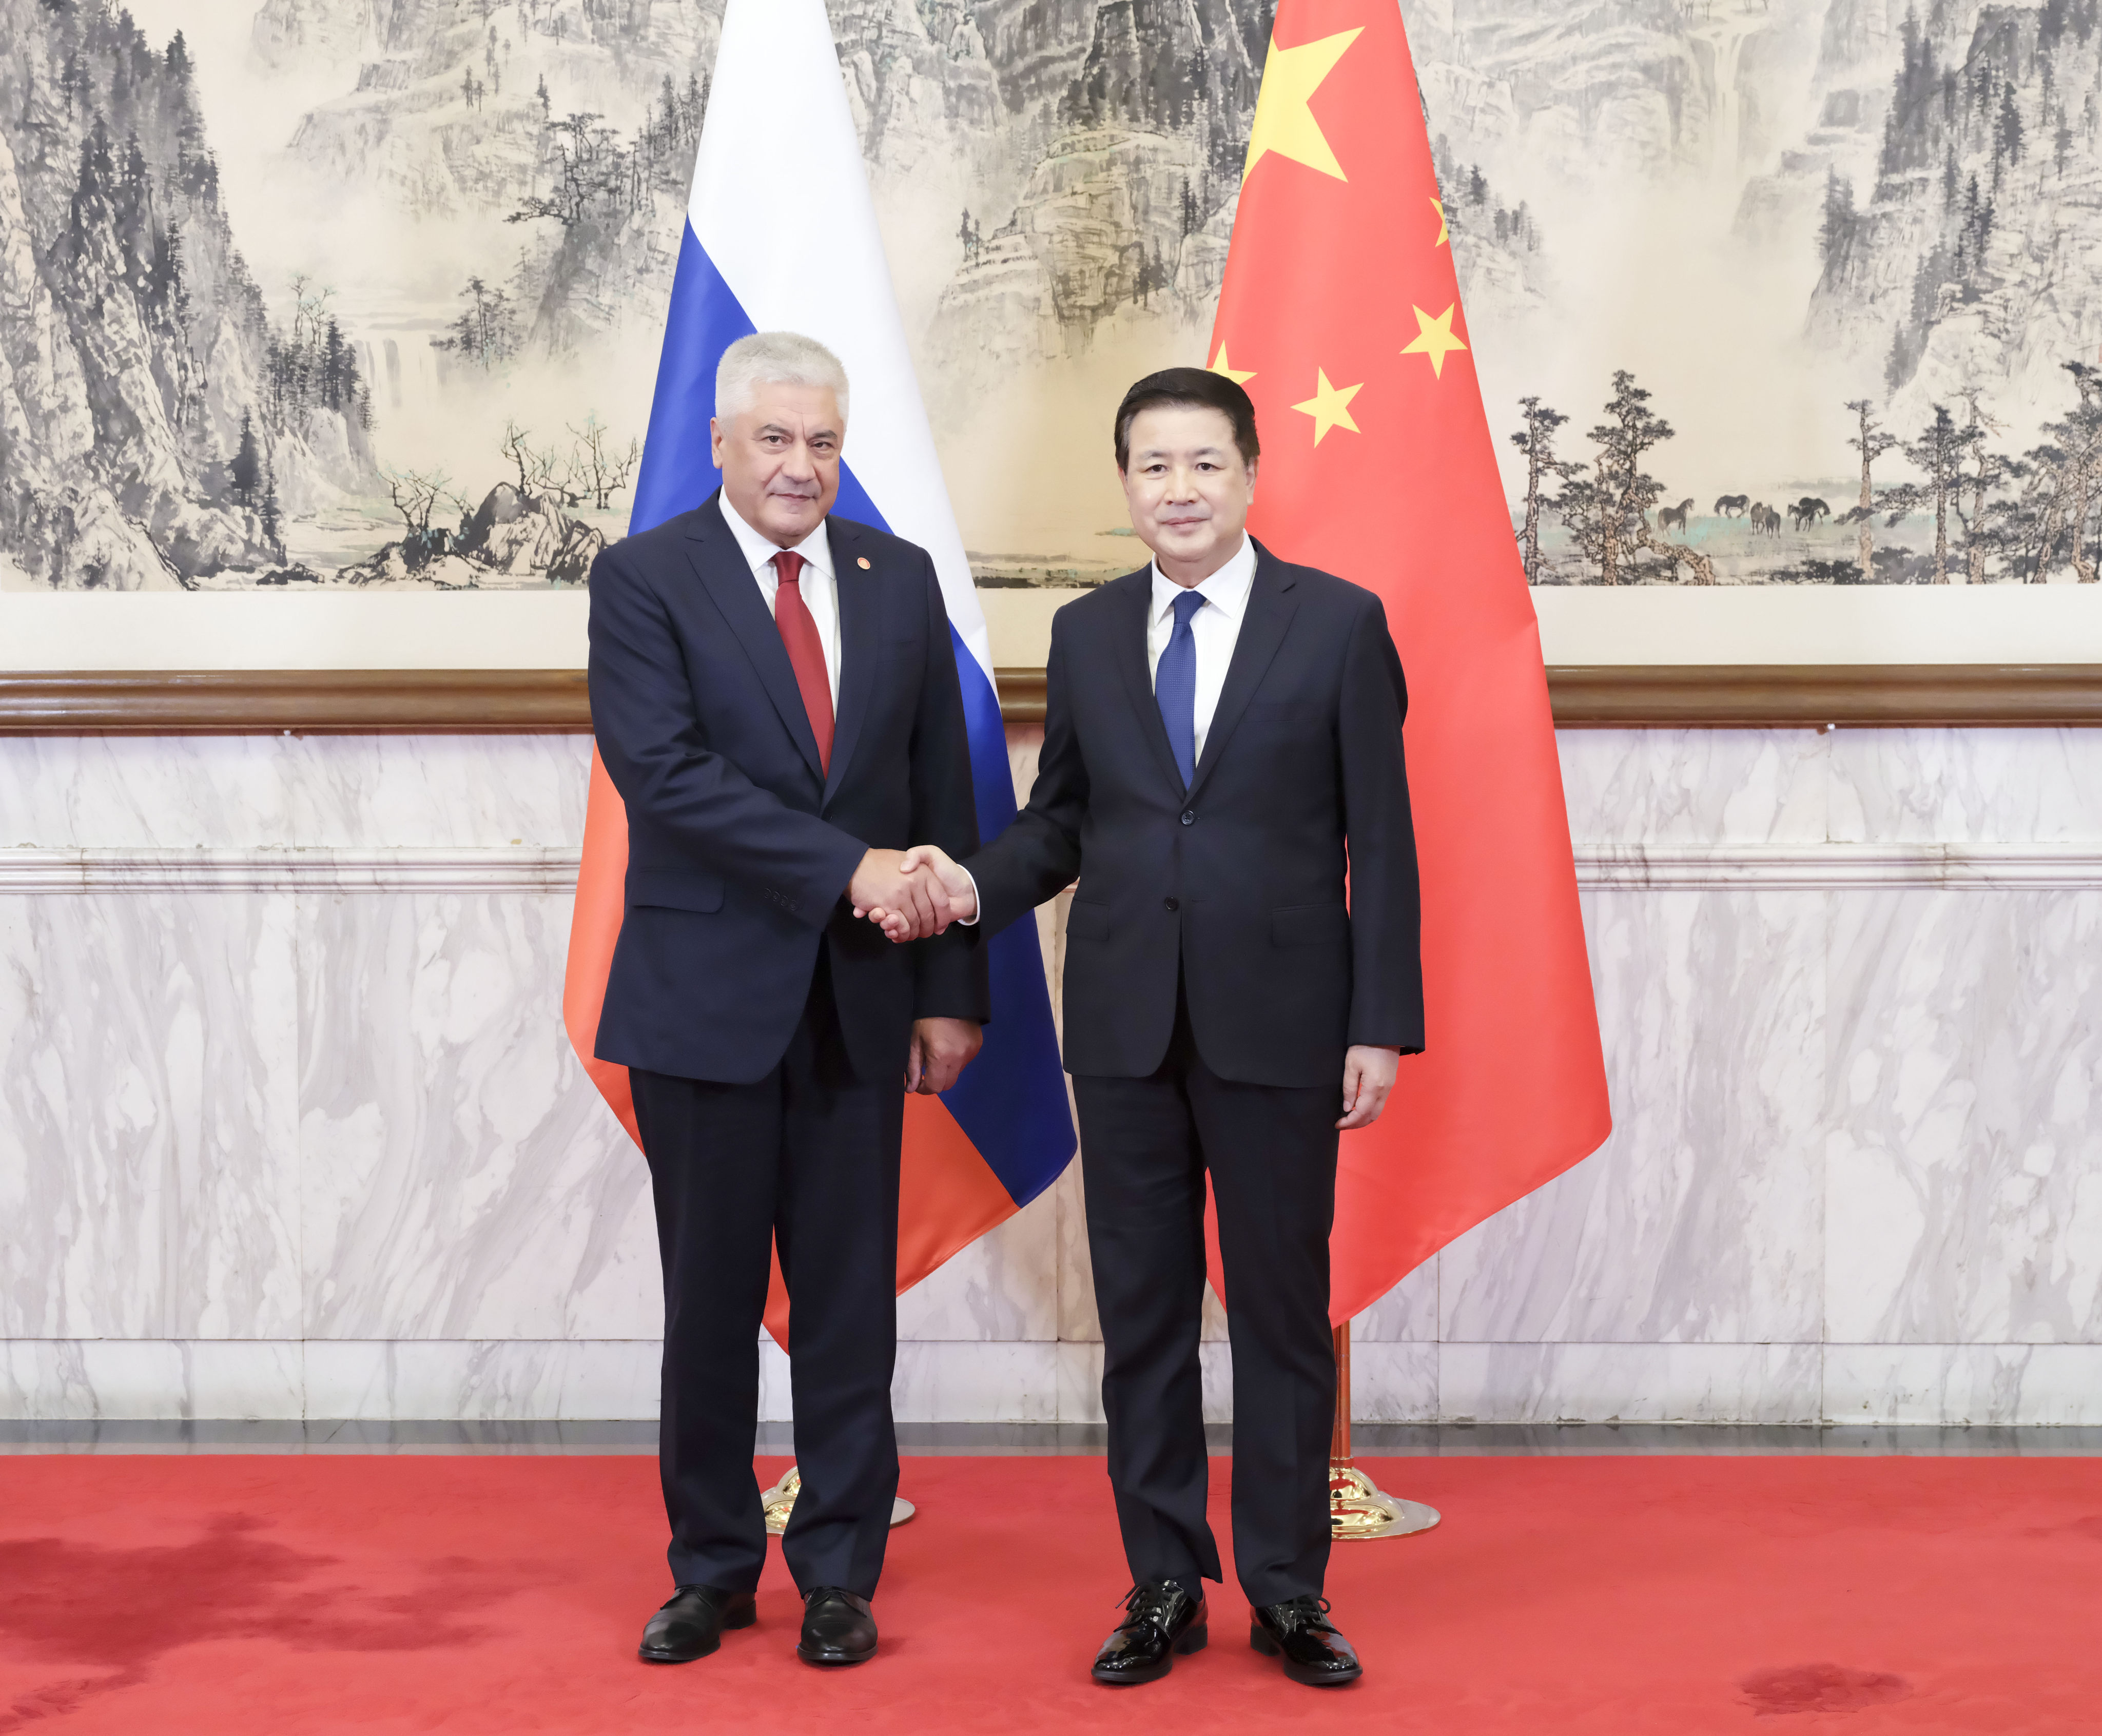 Chinese Minister of Public Security Wang Xiaohong (right) shakes hands with Russia’s Minister of Internal Affairs Vladimir Kolokoltsev in Beijing on Tuesday. Photo: Xinhua